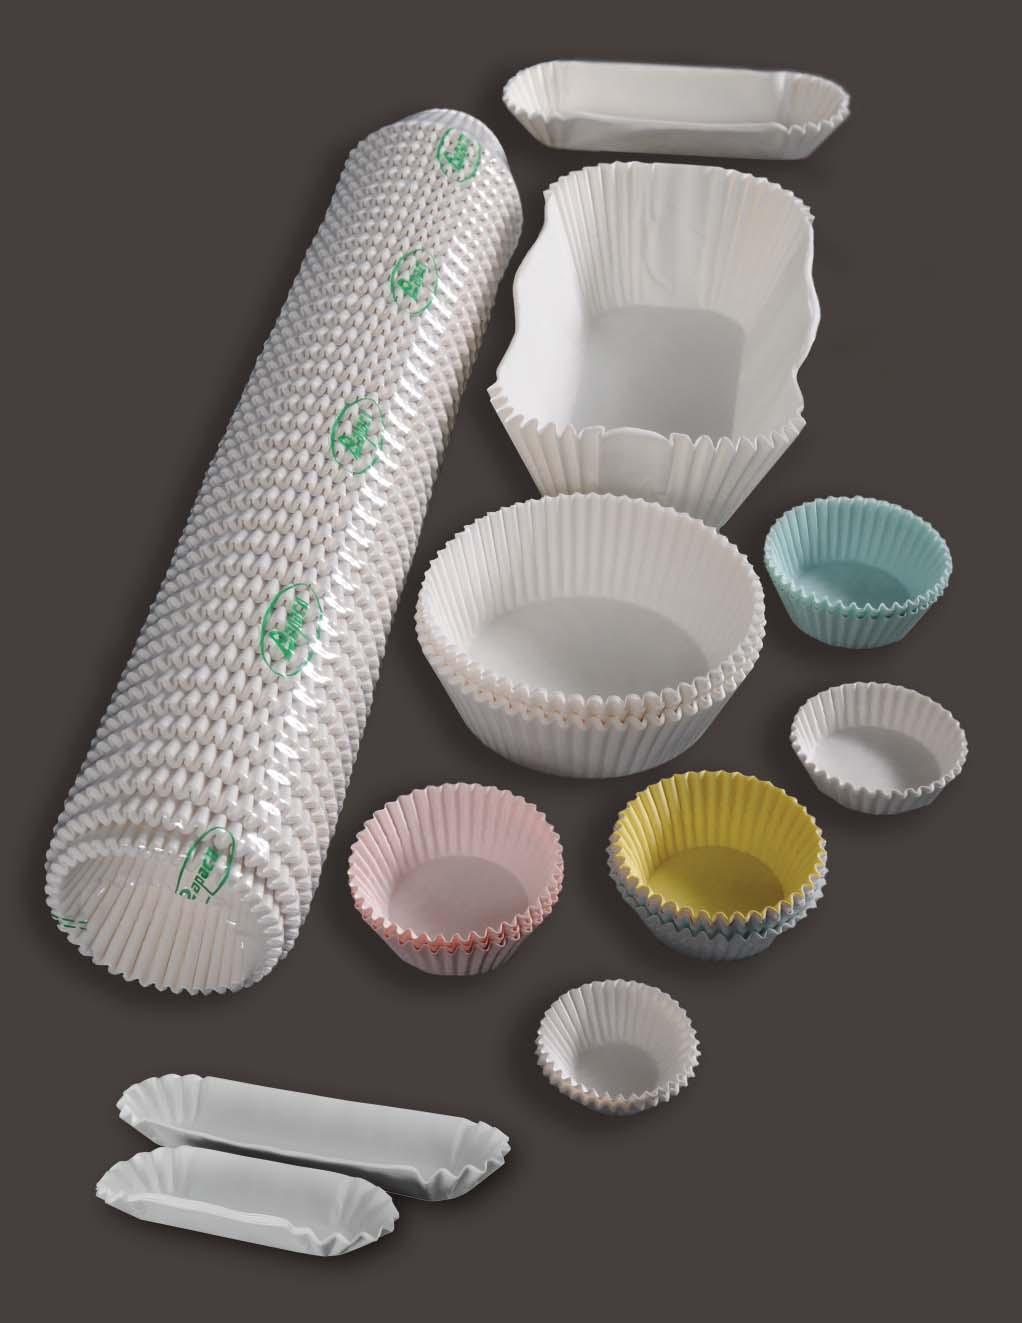 Baking cups (white) in a clear rigid easy to open sleeve